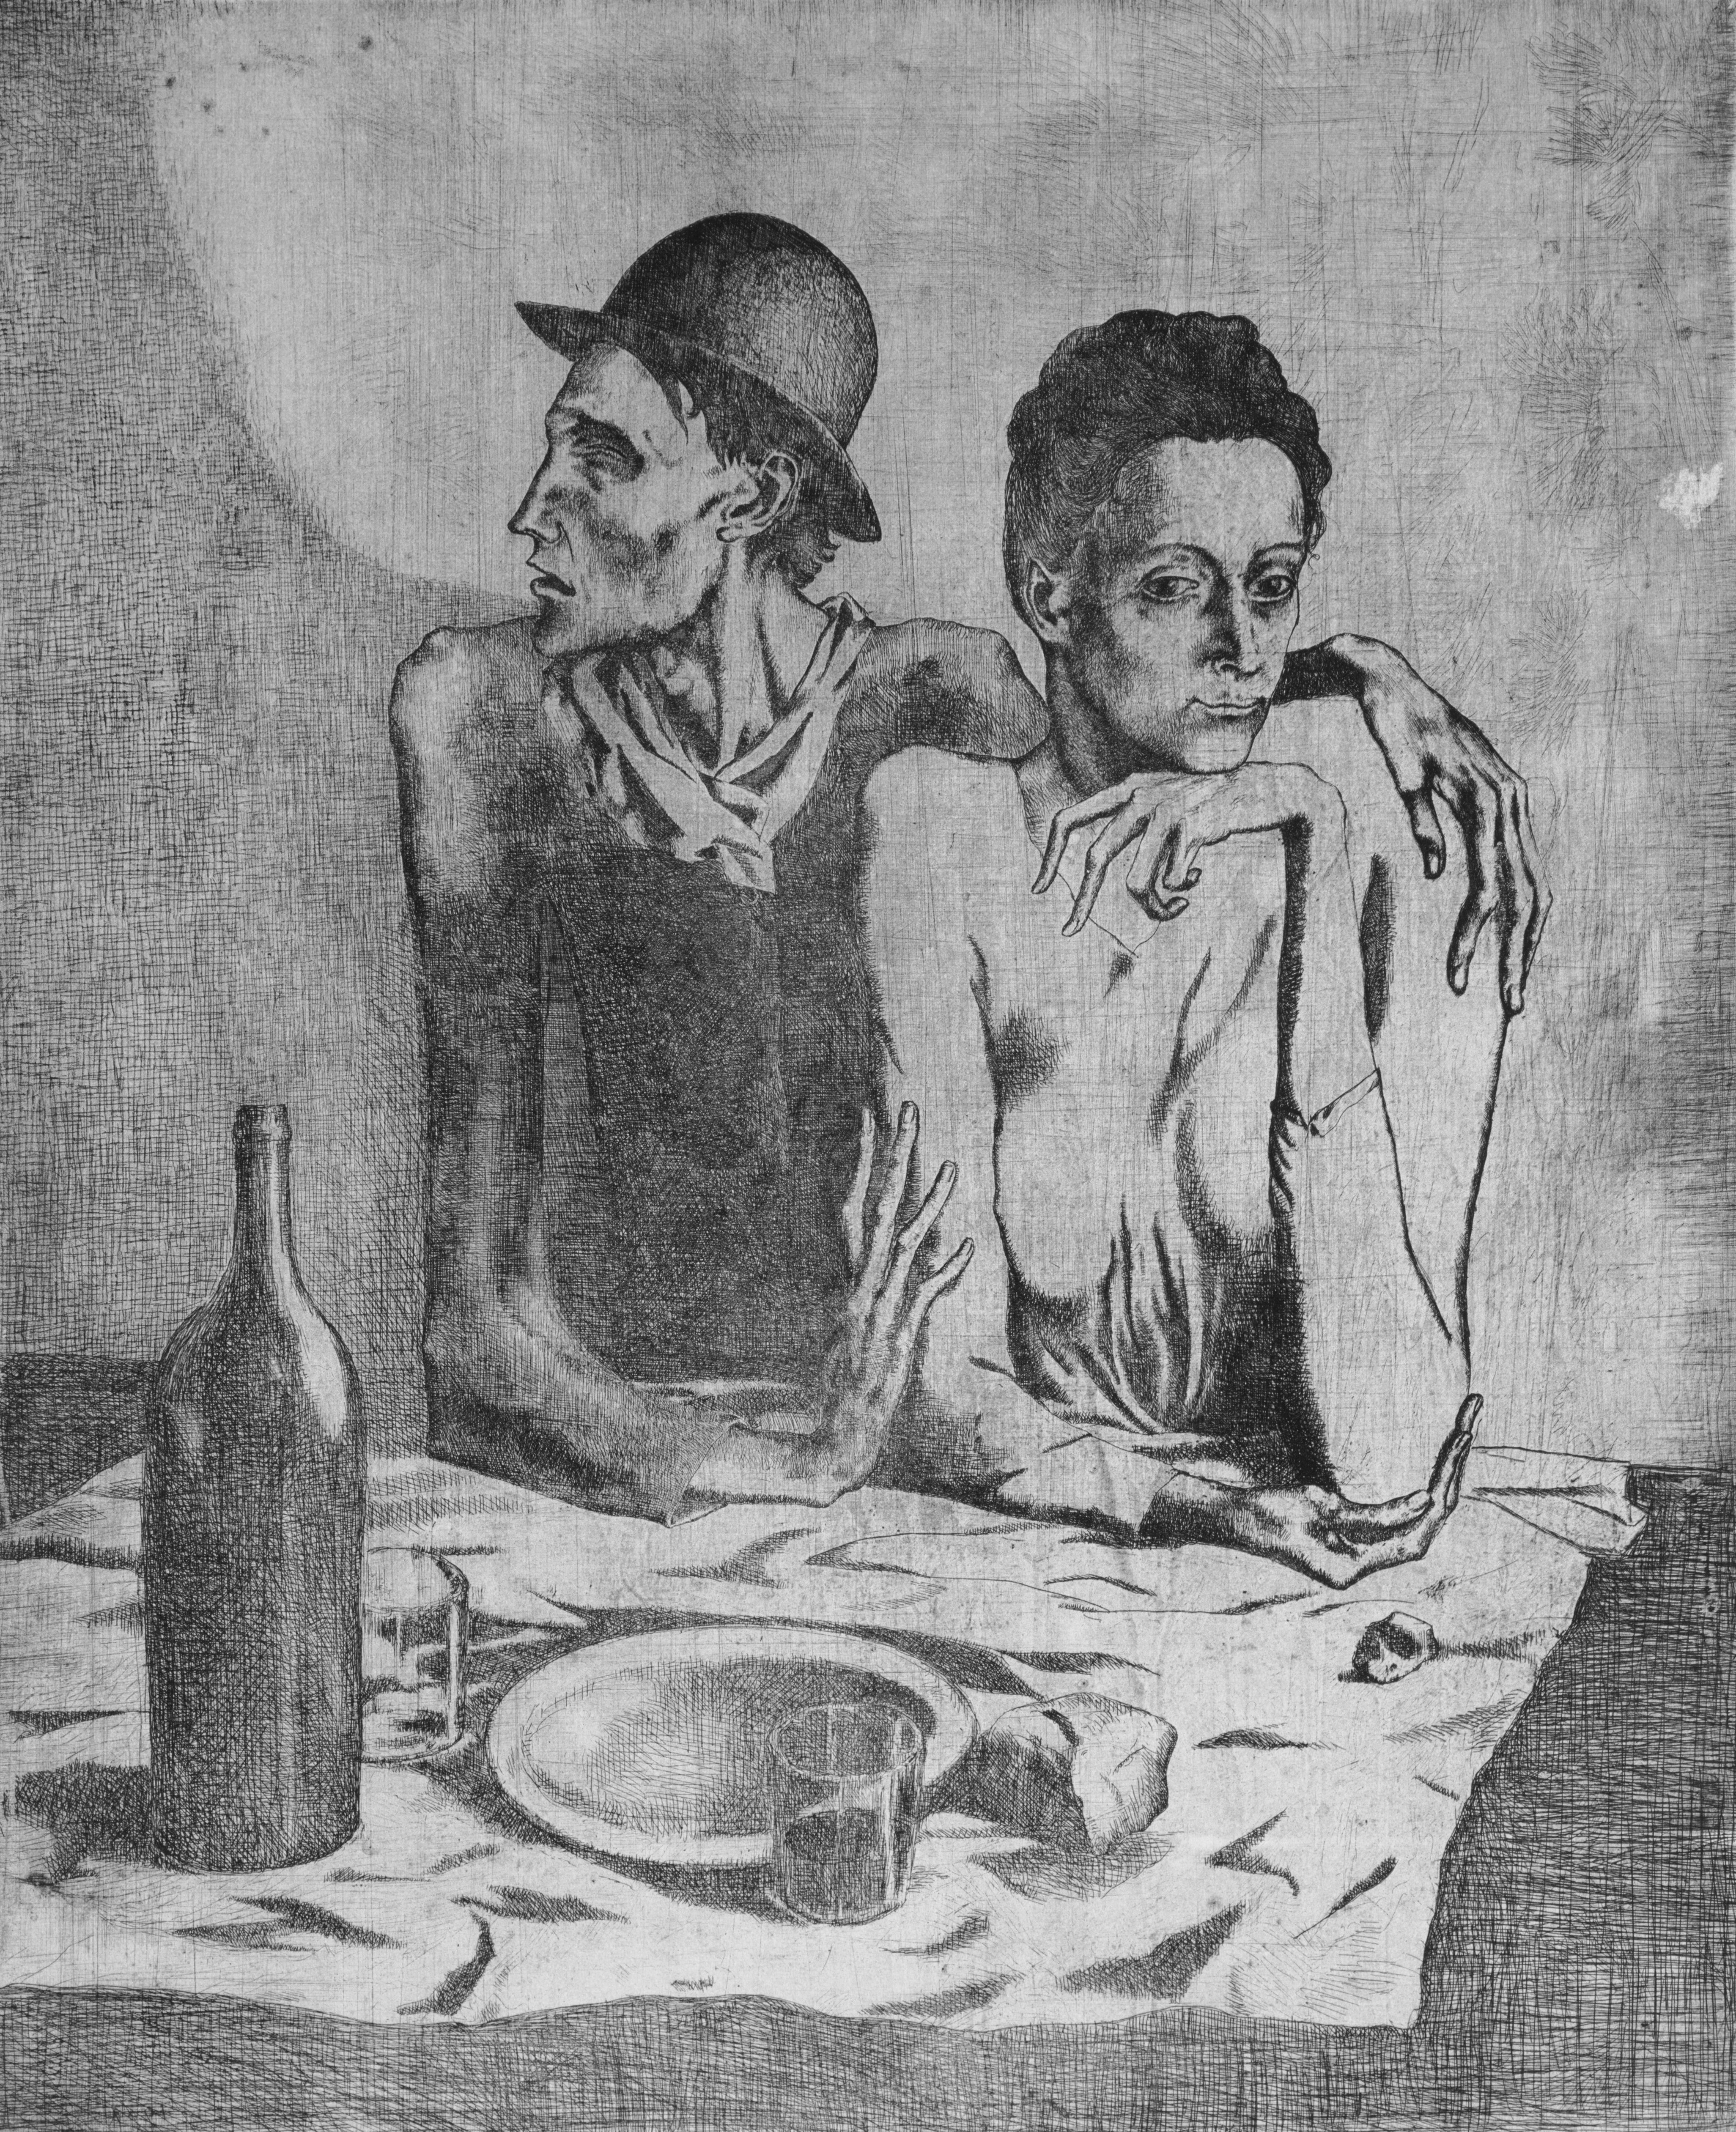 12 Ideal Picasso Vase Painting 2024 free download picasso vase painting of list of picasso artworks 1901 1910 wikipedia regarding pablo picasso 1904 le repas frugal the frugal repast printed in 1913 etching plate 46 7 x 36 cm sheet 65 4 x 4